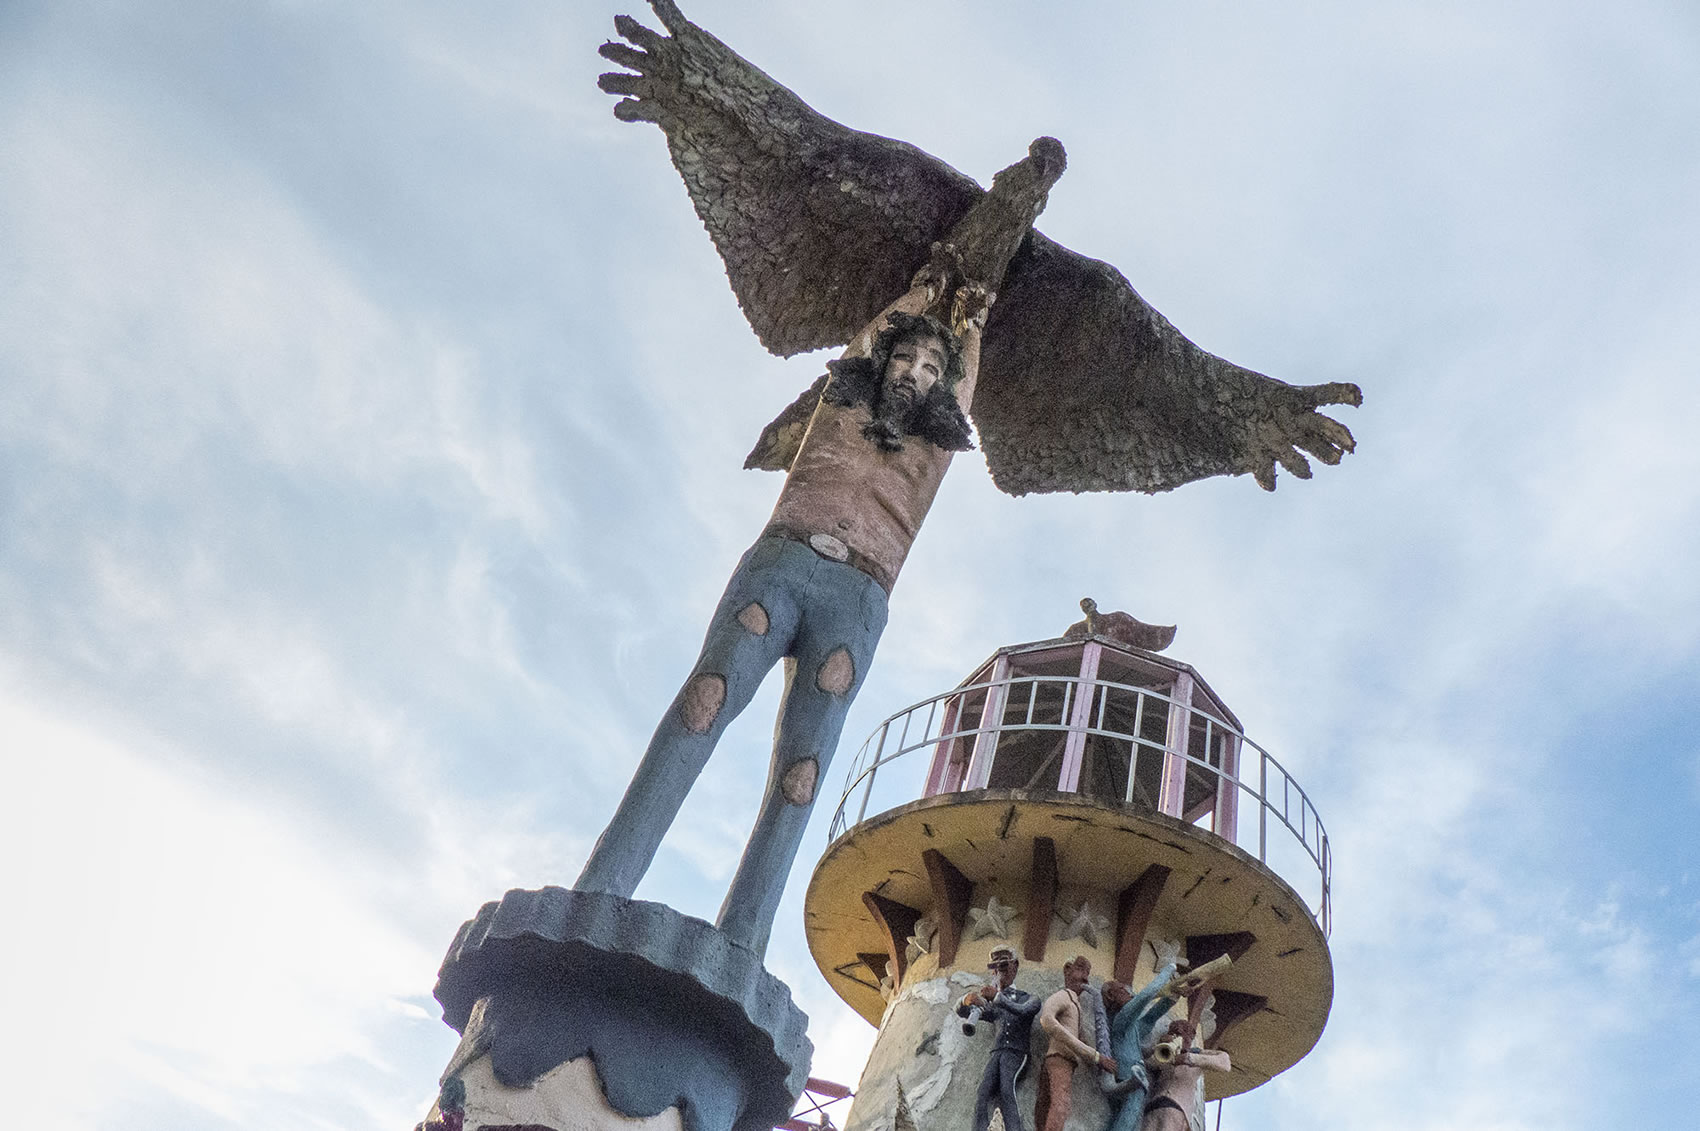 life-sized sculptures in Chauvin, Louisiana